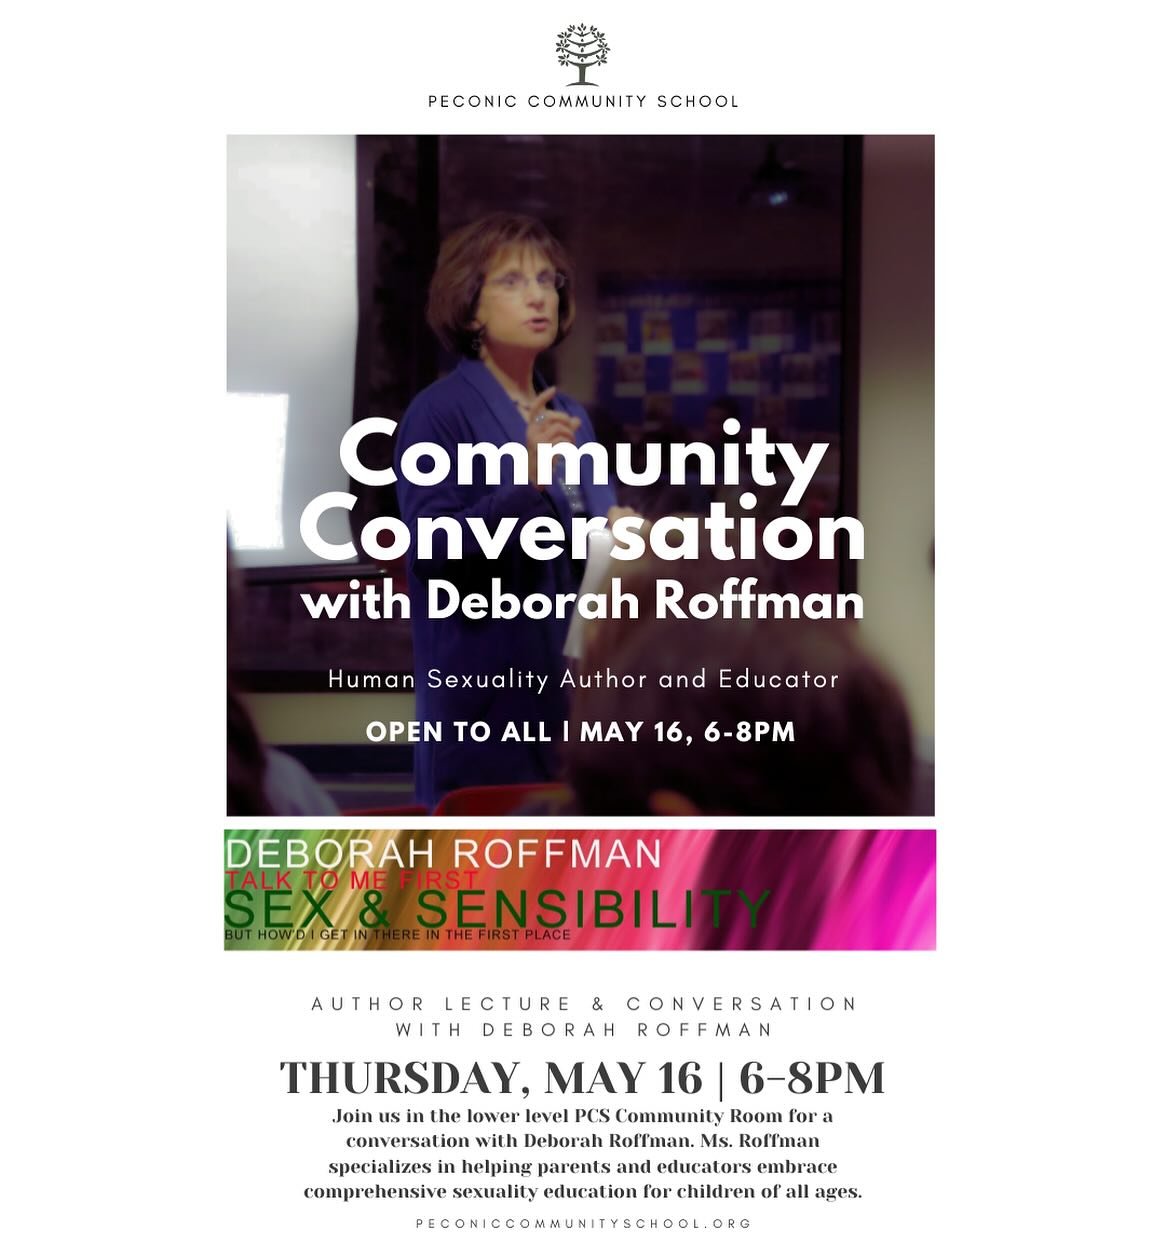 Please join us tomorrow evening, Thursday, May 16th from 6 to 8pm for a community conversation with Deborah Roffman, noted author and educator specializing in comprehensive sexuality and gender education for children of all ages. 

Ms. Roffman is a s